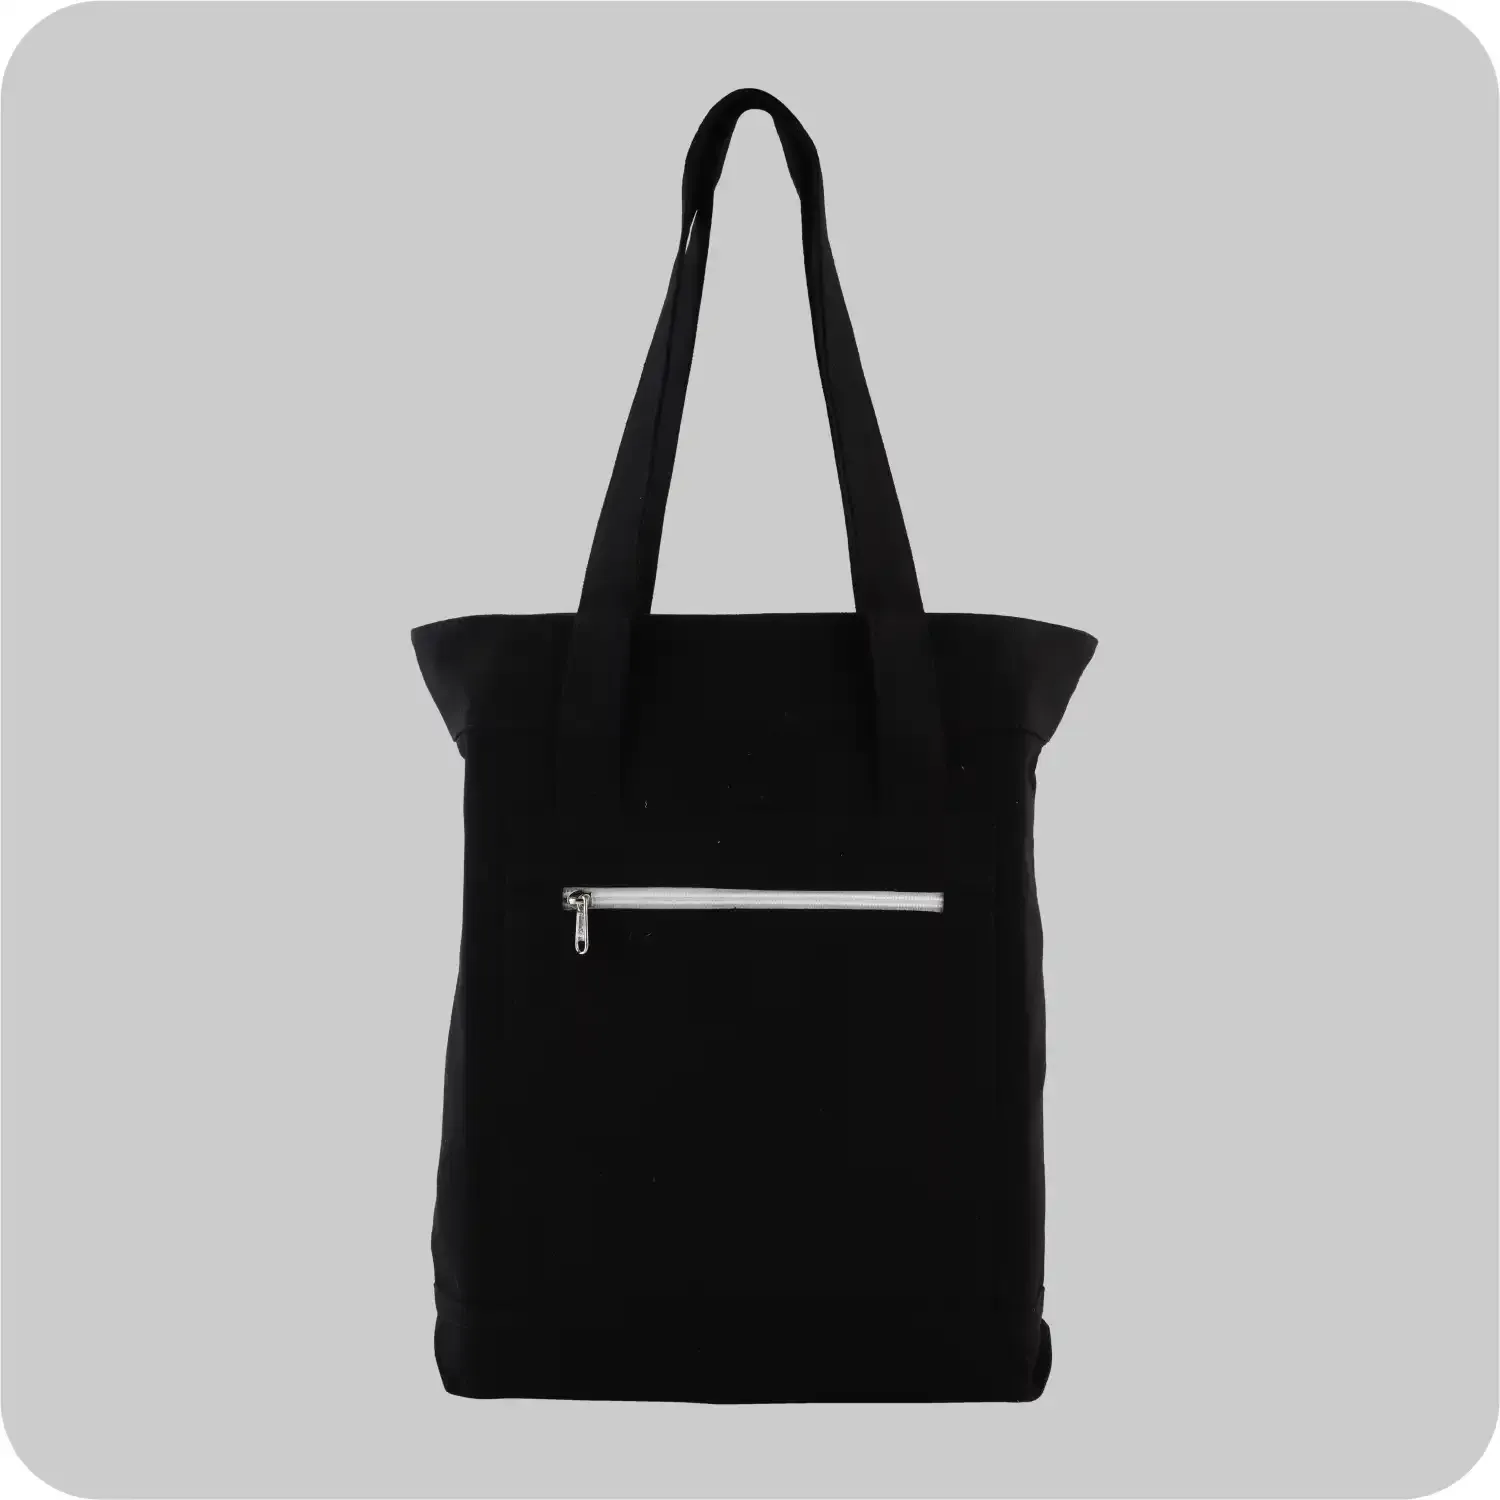 15 X 15 Inches, with a Cute Zipped pocket Black Canvas Bags